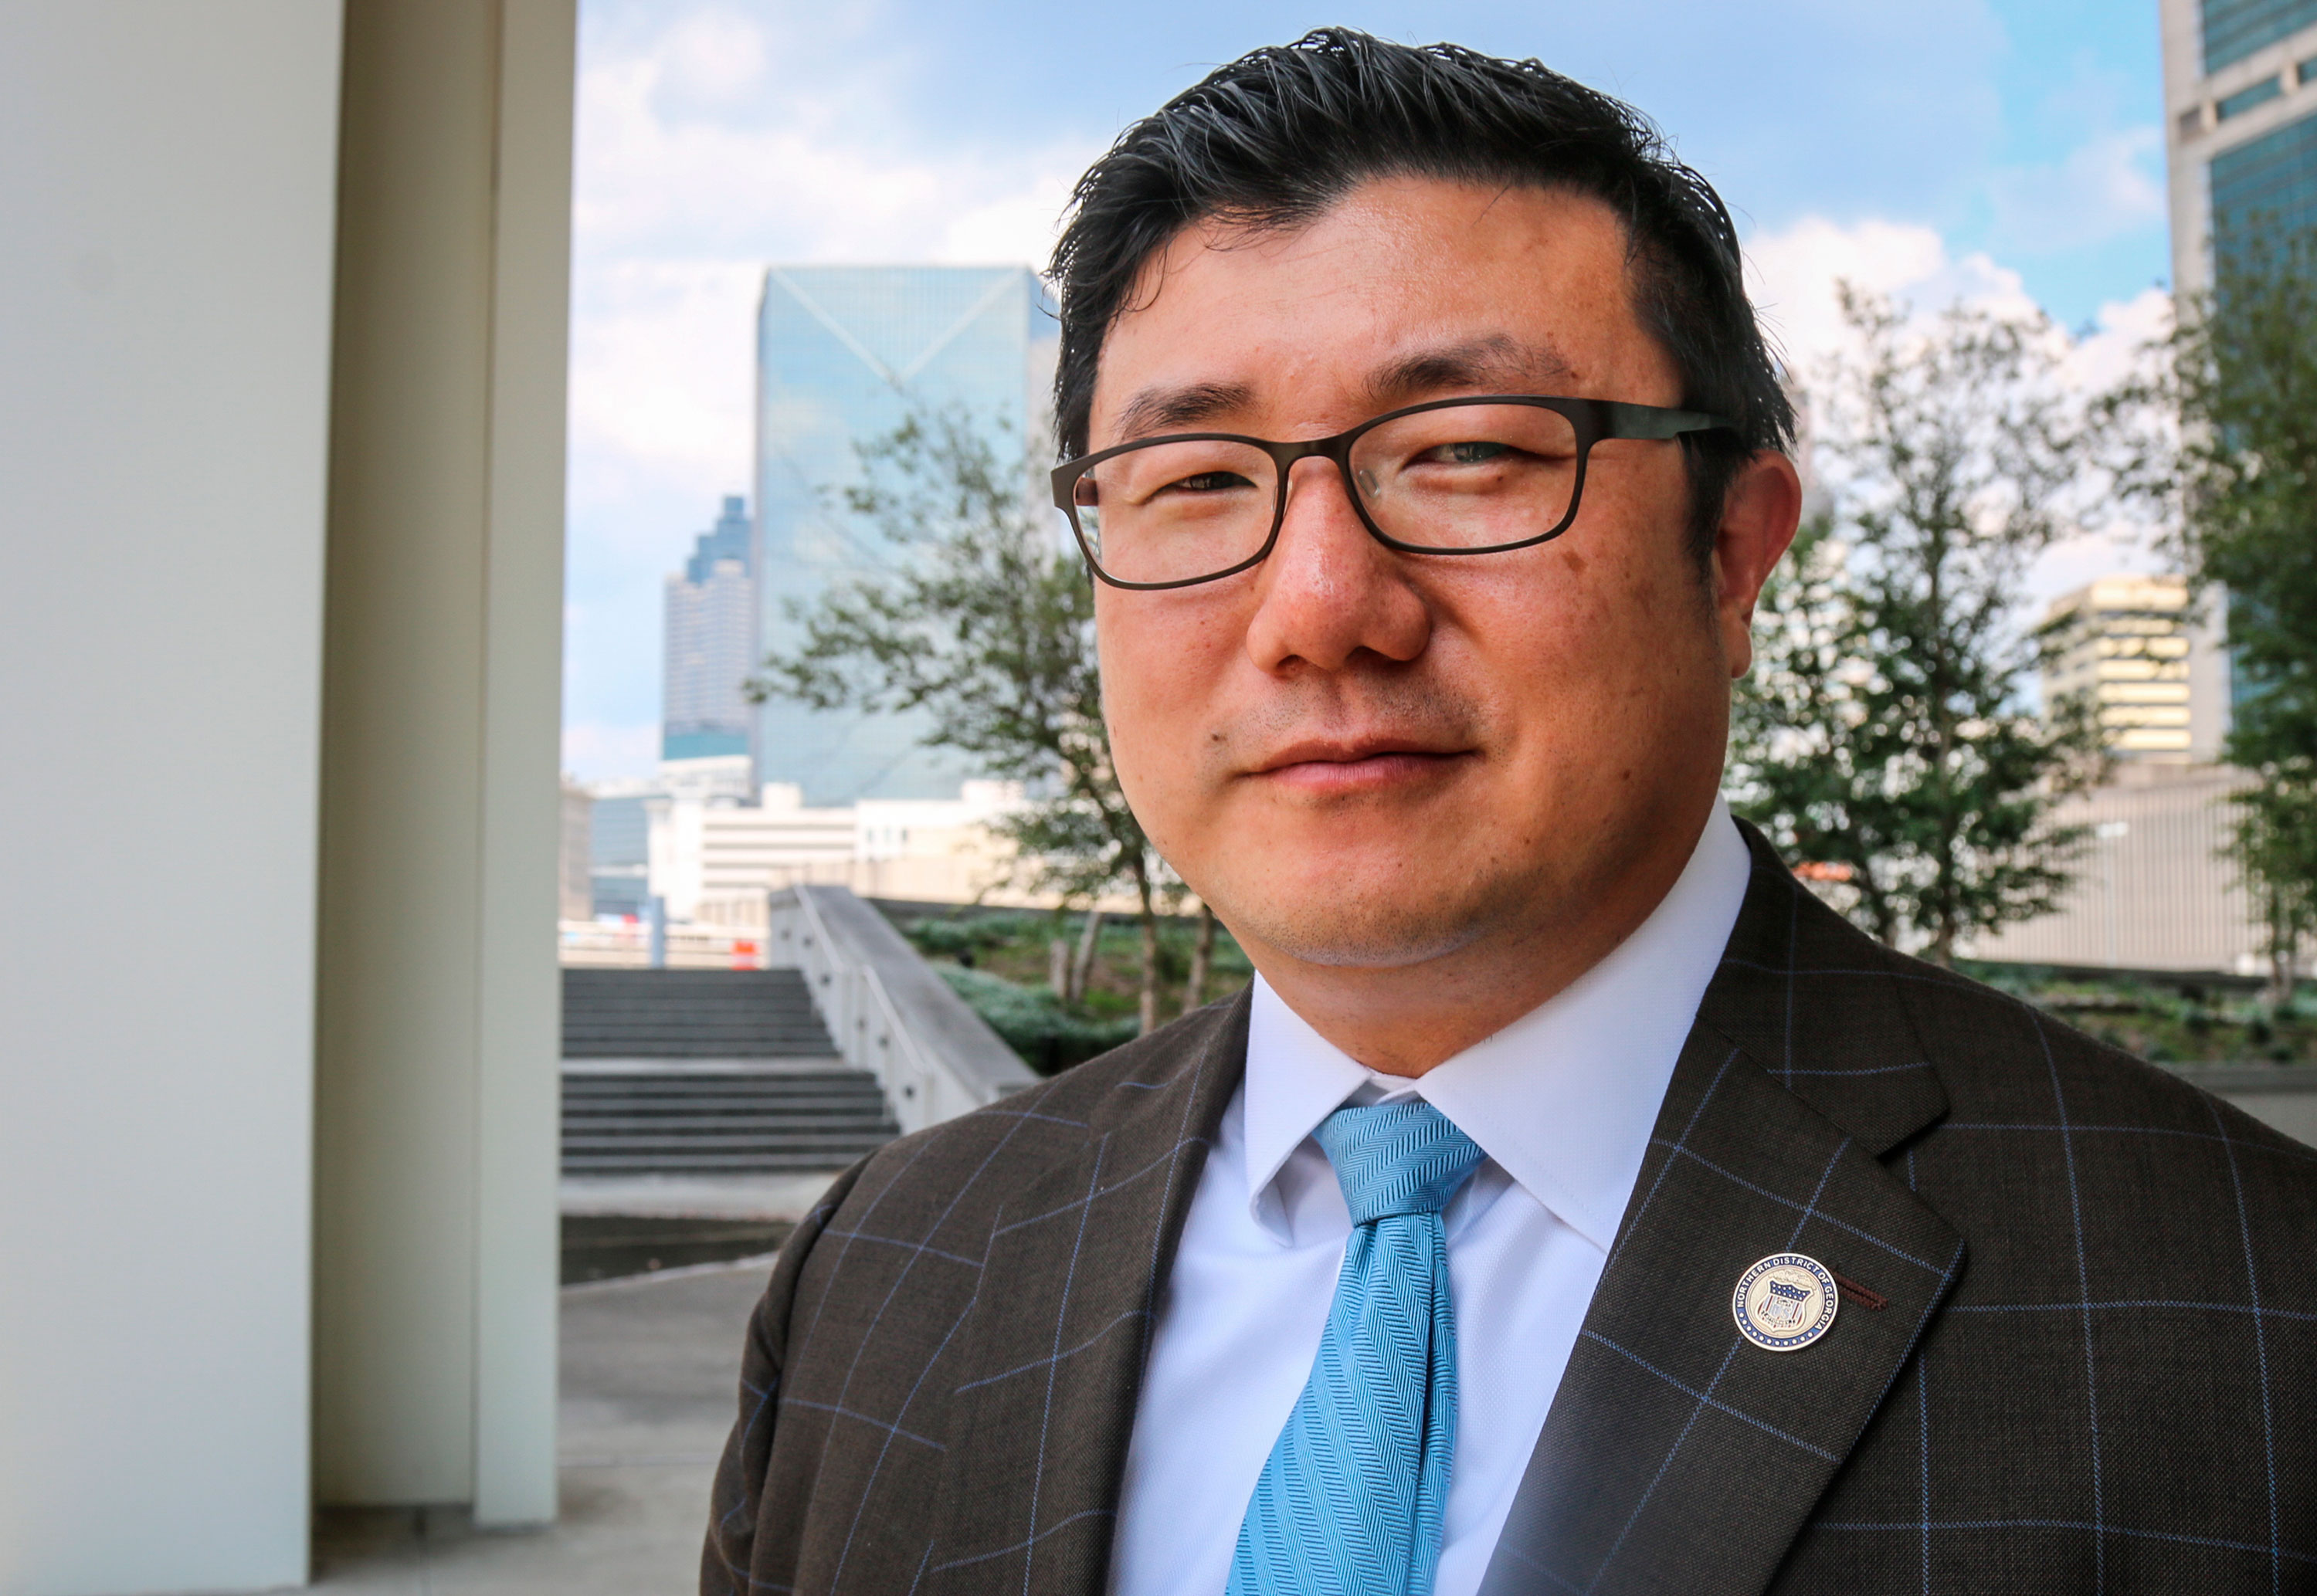 Former US attorney for the North District of Georgia Byung "BJay" Pak is seen following a news conference in Atlanta in 2019.